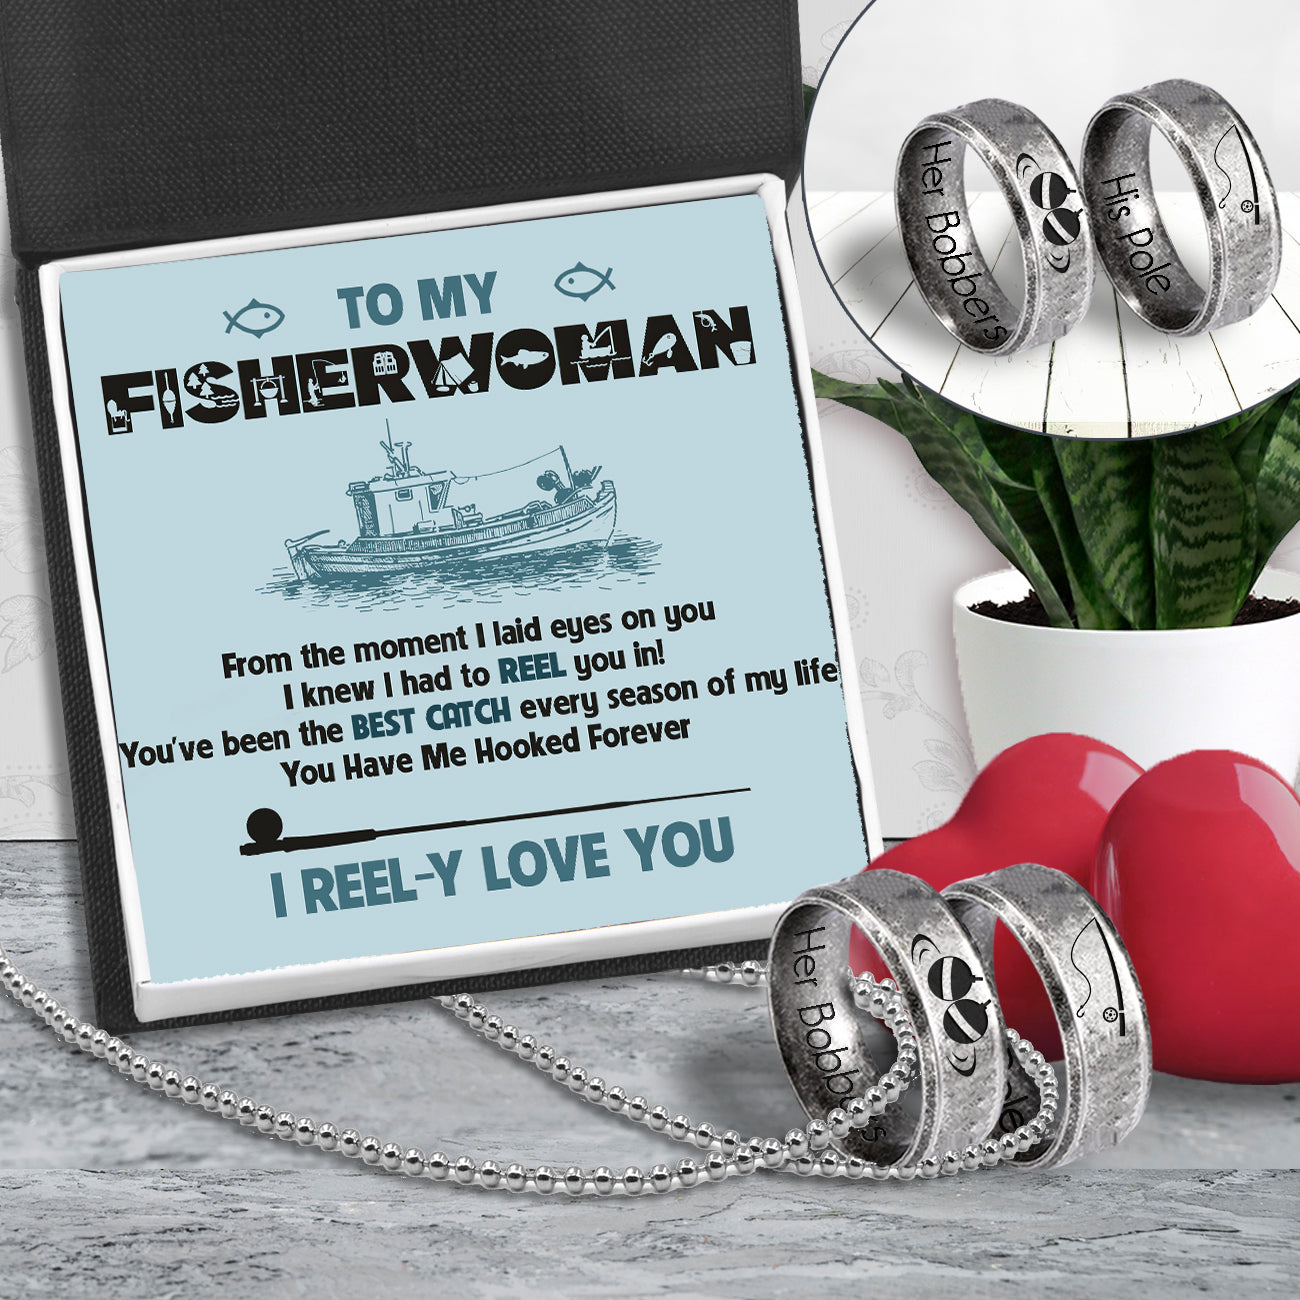 Fishing Ring Couple Necklaces - Fishing - To My Fisherwoman - You've Been The Best Catch Every Season Of My Life - Ukgndx13010